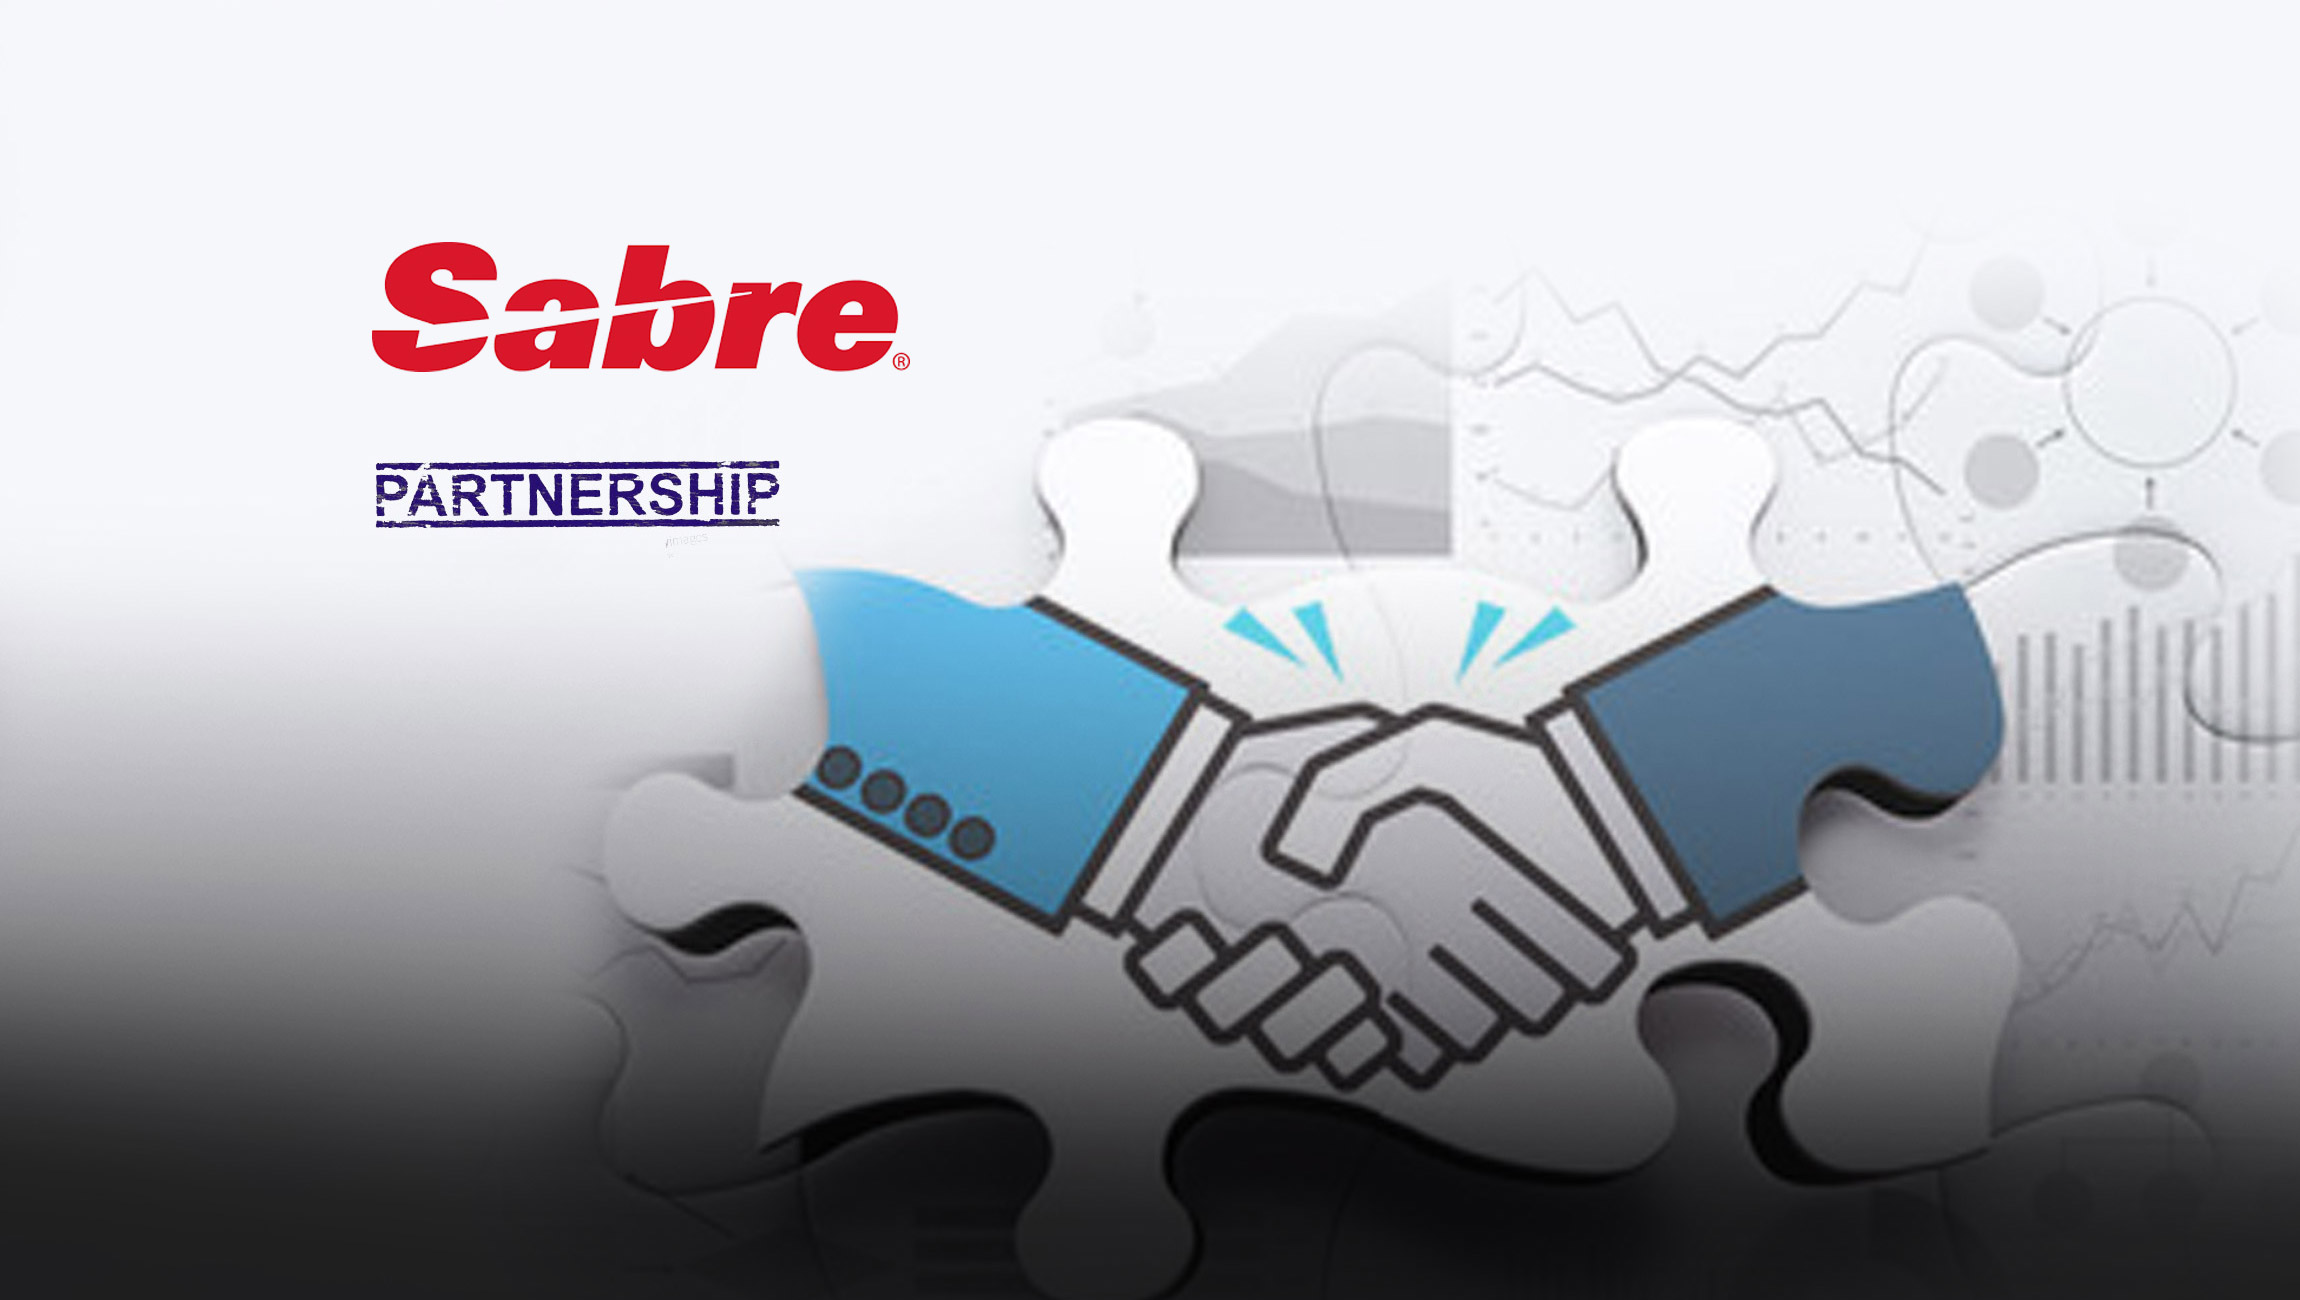 Calafia Airlines selects Sabre as its preferred distribution partner to accelerate growth and boost sales